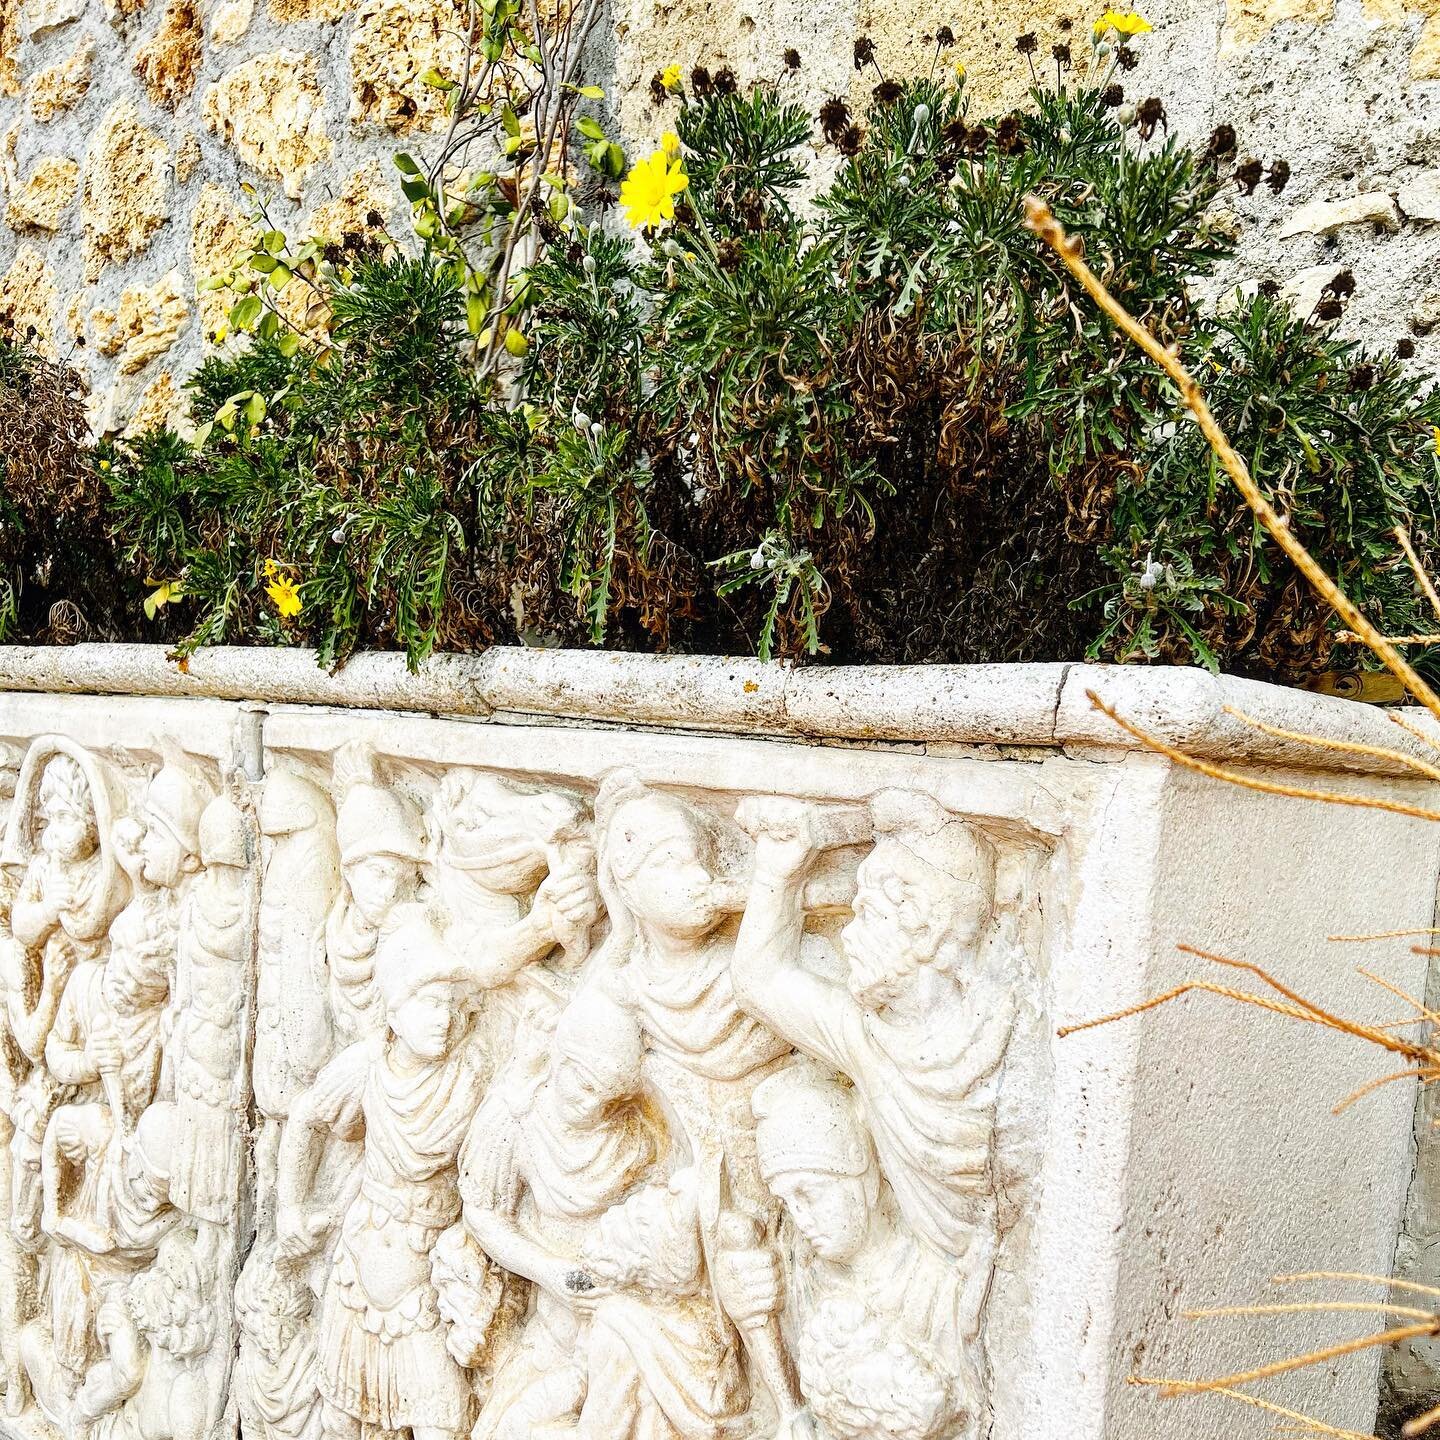 When your property comes with an ancient Roman sarcophagus, you plant flowers in it 💚 We cannot wait to show you the remodeling and furnishing happening right now! Soon we will be ready to host your holiday vacation 🥰
.
Join us late October for our